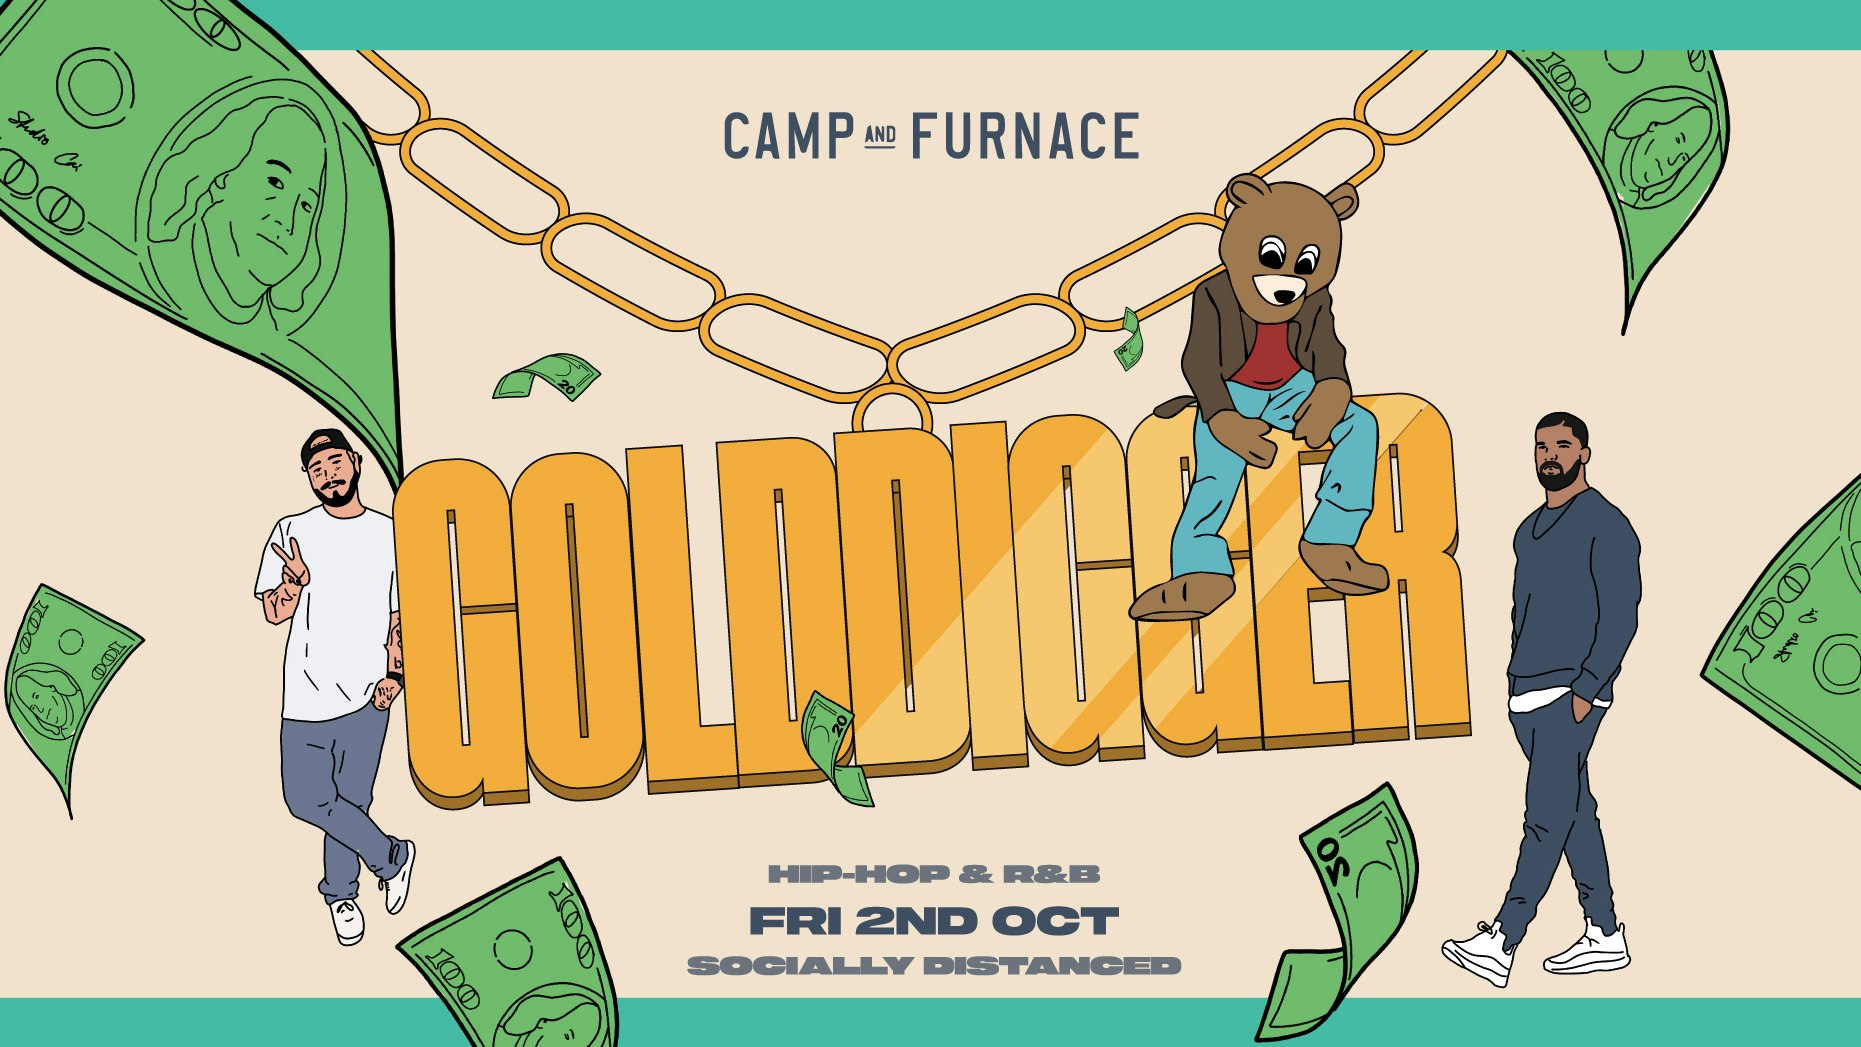 Gold Digger Liverpool Freshers : Socially Distanced : Fri 2nd Oct : C&F